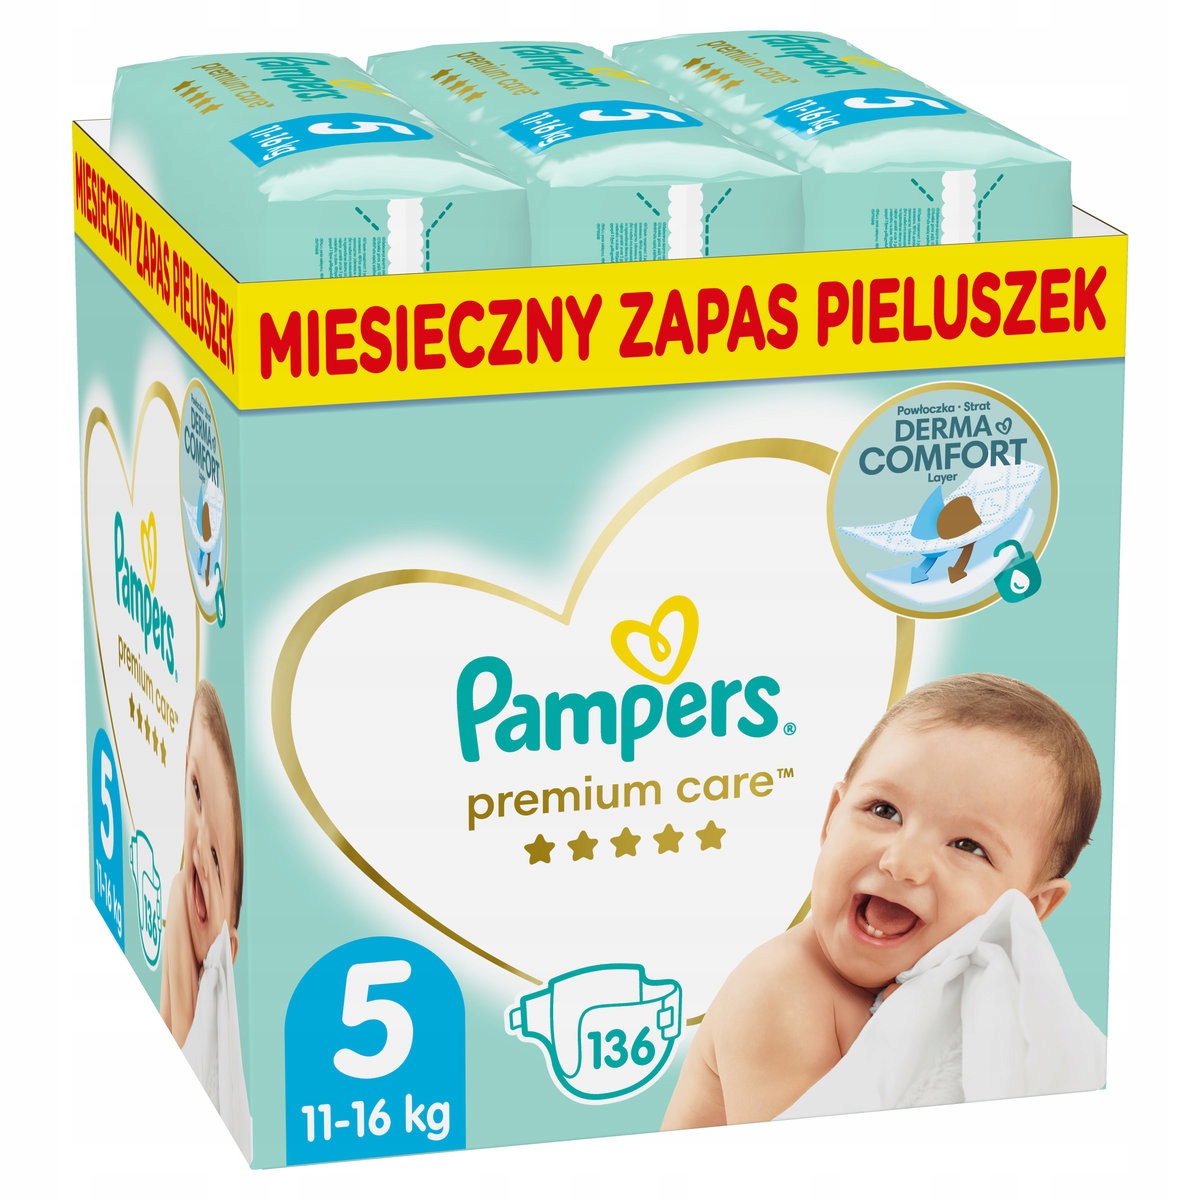 pampers new baby seal